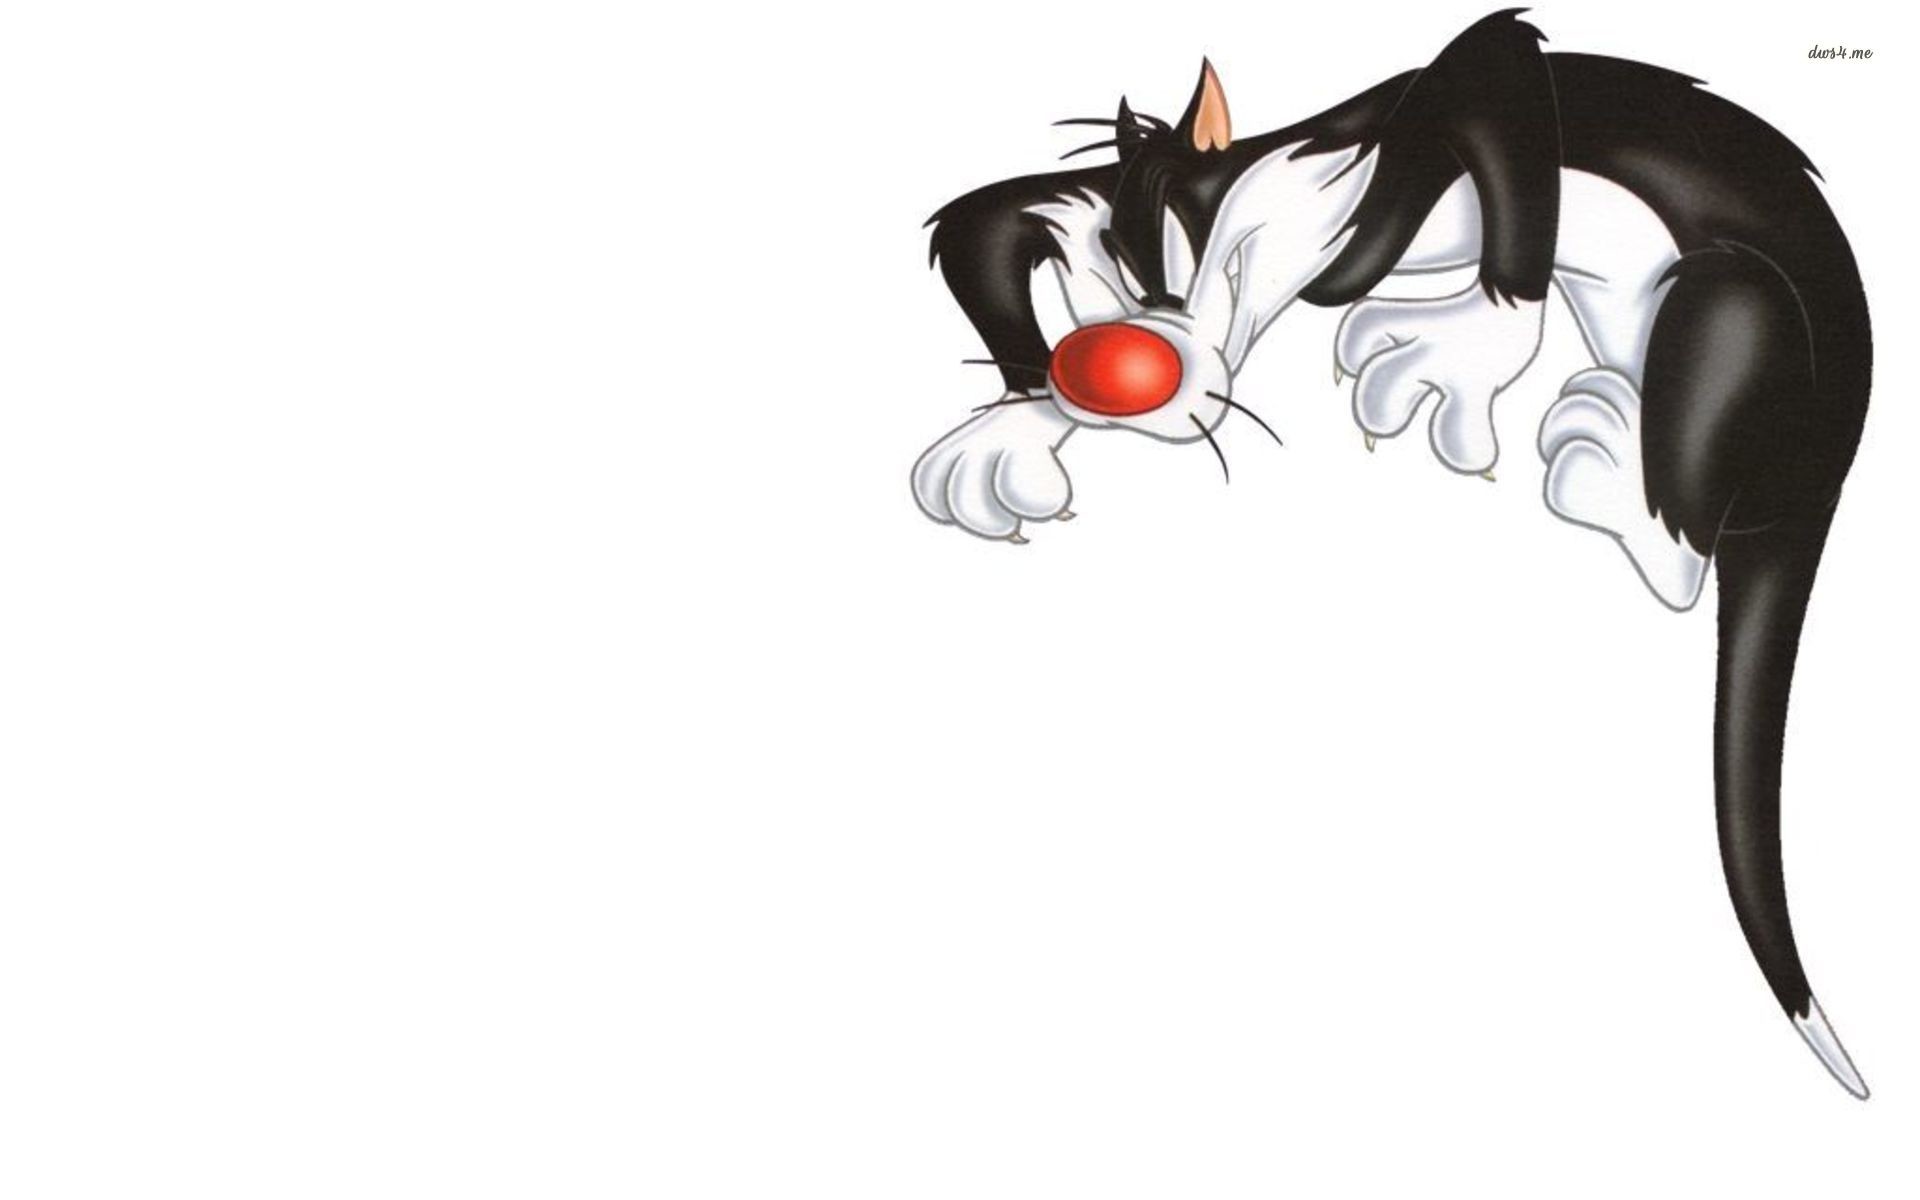 Sylvester The Cat Wallpaper 58 Images